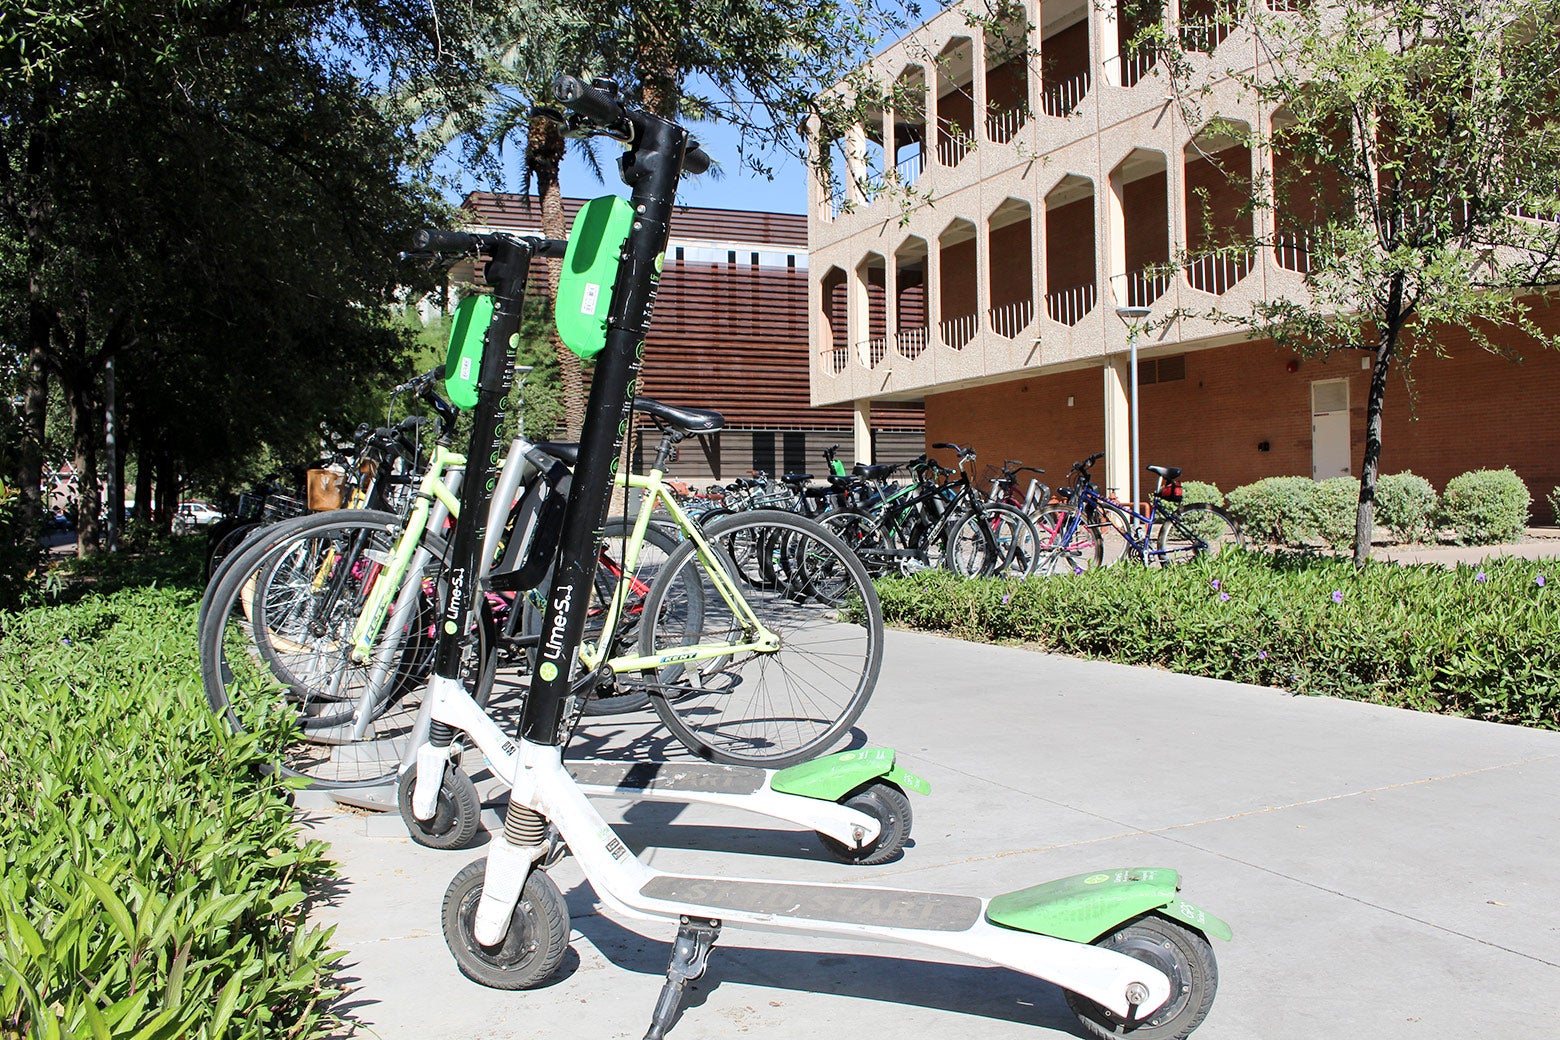 Lines of electric Lime scooters.